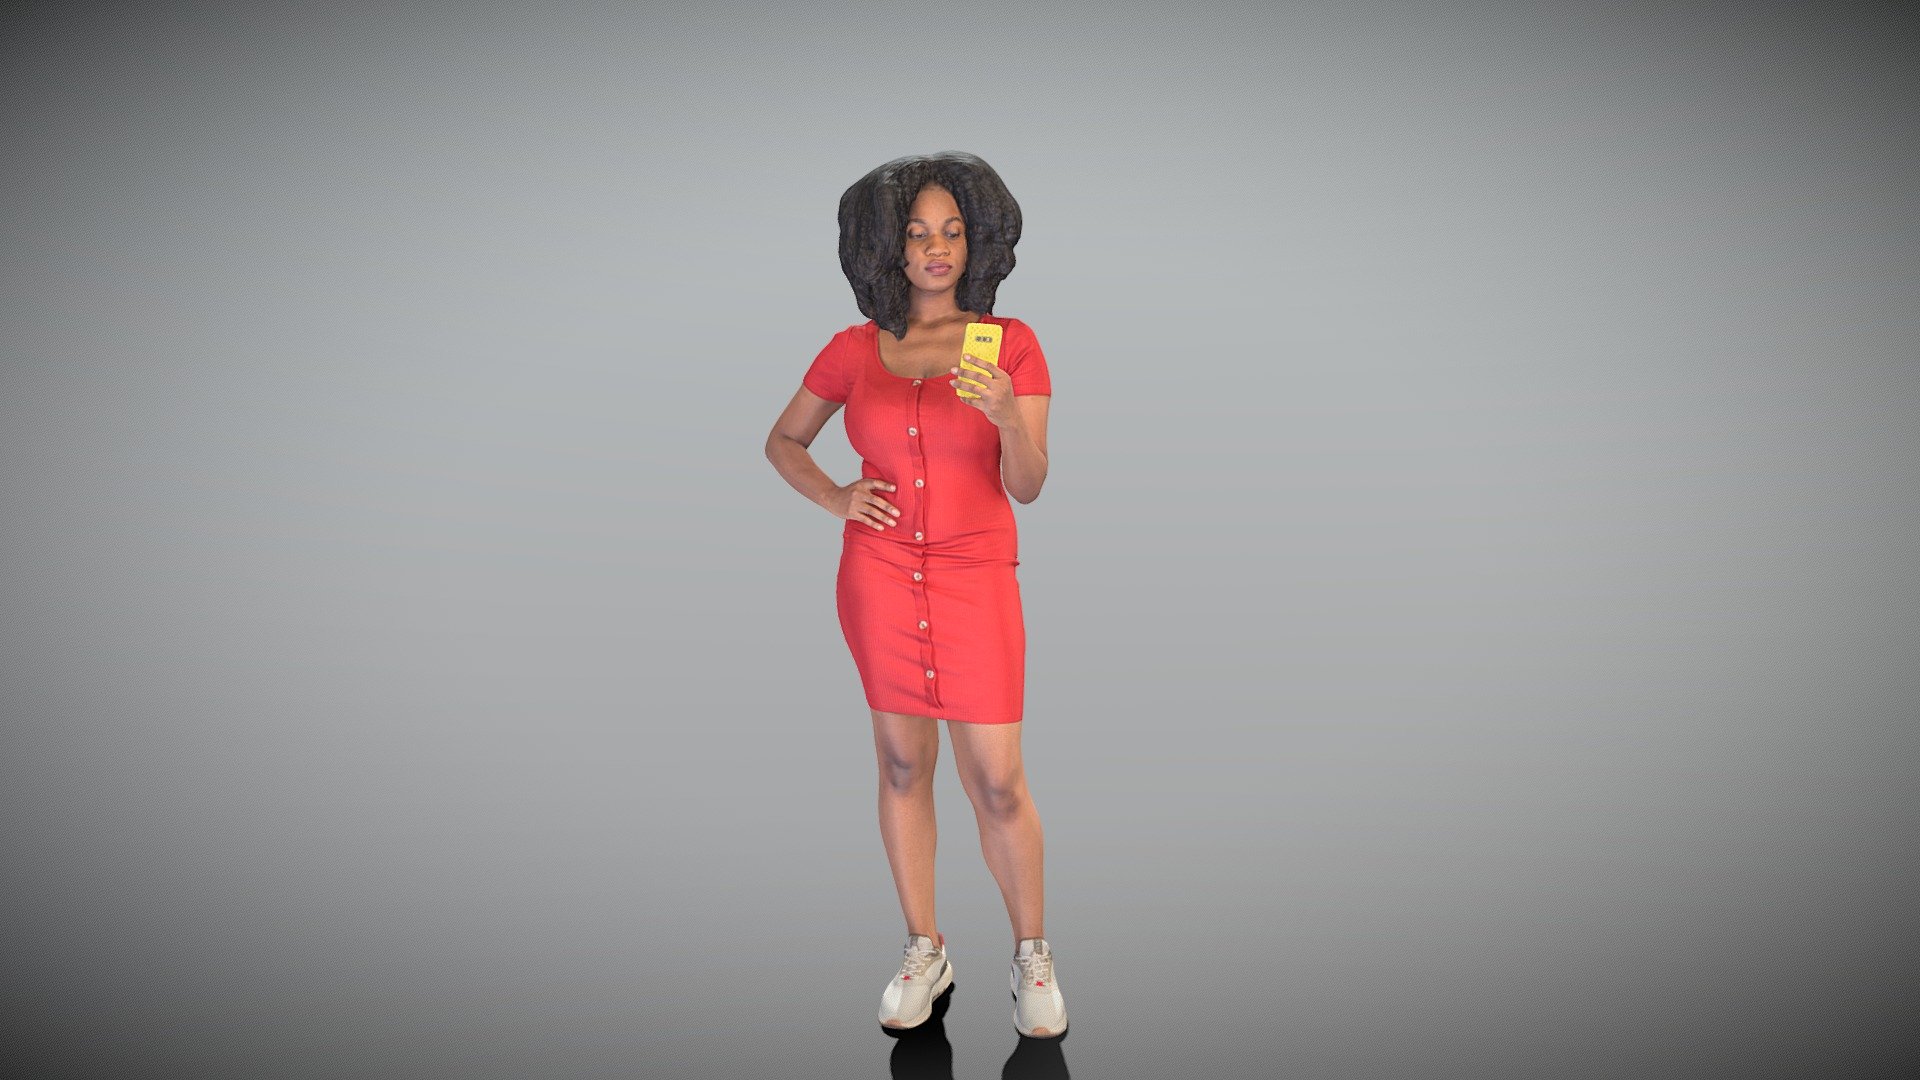 This is a true human size and detailed model of a beautiful young woman of Caucasian appearance dressed in little red dress. The model is captured in casual pose to be perfectly matching for various architectural, product visualization as a background character within urban installations, city designs, outdoor design presentations, VR/AR content, etc.

Technical specifications:


digital double 3d scan model
150k &amp; 30k triangles | double triangulated
high-poly model (.ztl tool with 5 subdivisions) clean and retopologized automatically via ZRemesher
sufficiently clean
PBR textures 8K resolution: Diffuse, Normal, Specular maps
non-overlapping UV map
no extra plugins are required for this model

Download package includes a Cinema 4D project file with Redshift shader, OBJ, FBX, STL files, which are applicable for 3ds Max, Maya, Unreal Engine, Unity, Blender, etc. All the textures you will find in the “Tex” folder, included into the main archive.

3D EVERYTHING

Stand with Ukraine! - Attractive woman in dress using smartphone 381 - Buy Royalty Free 3D model by deep3dstudio 3d model